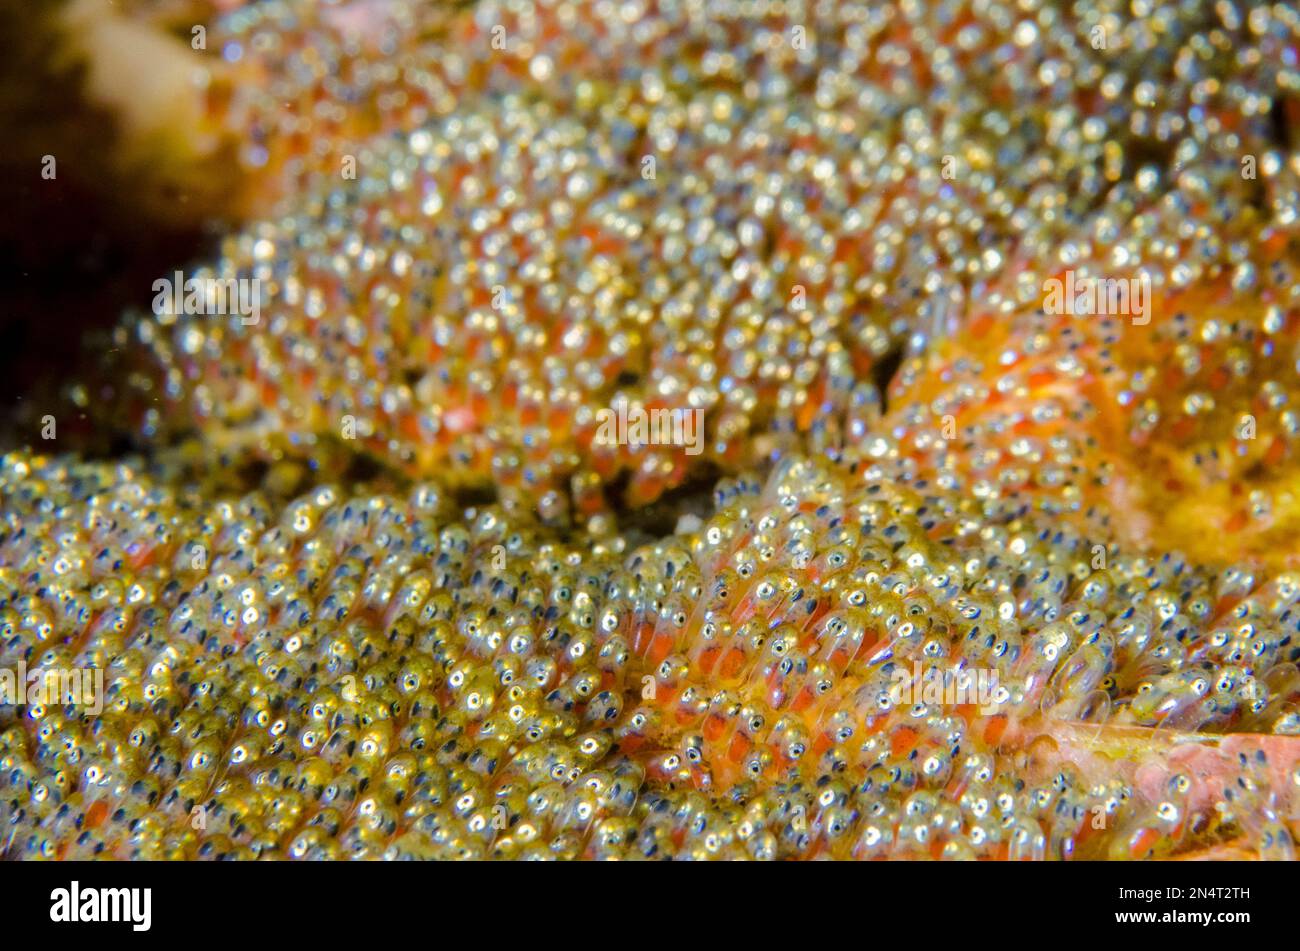 Eyes in eggs of Clark's Anemonefish, Amphiprion clarkii, Gili Tepekong dive site, Candidasa, Bali, Indonesia Stock Photo